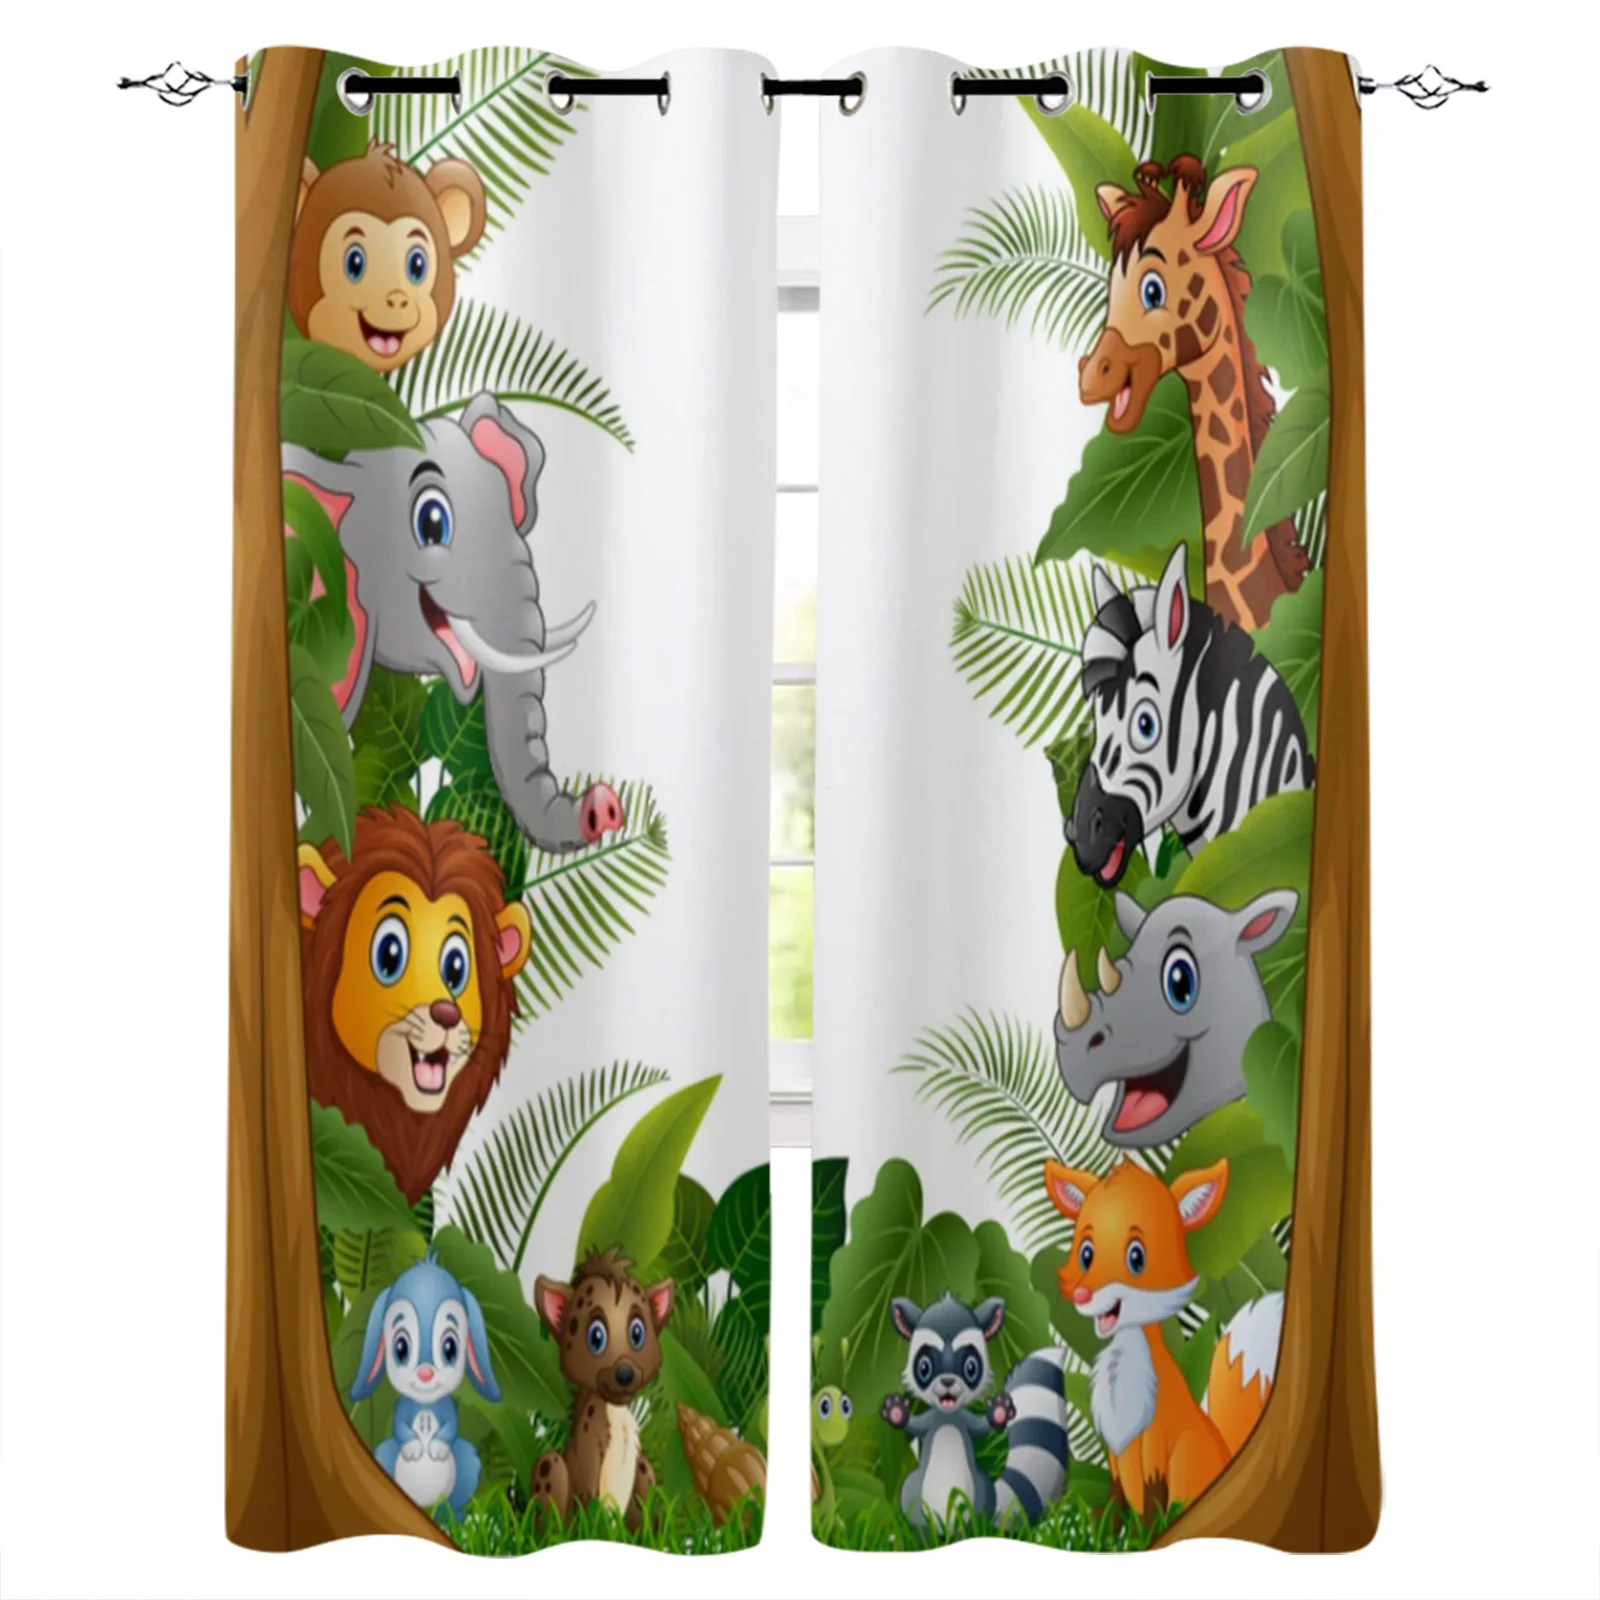 

Jungle Cartoon Animal Elephant Monkey Windows Curtains for Living Room Child Bedroom Window Treatment Blinds Kitchen Curtains